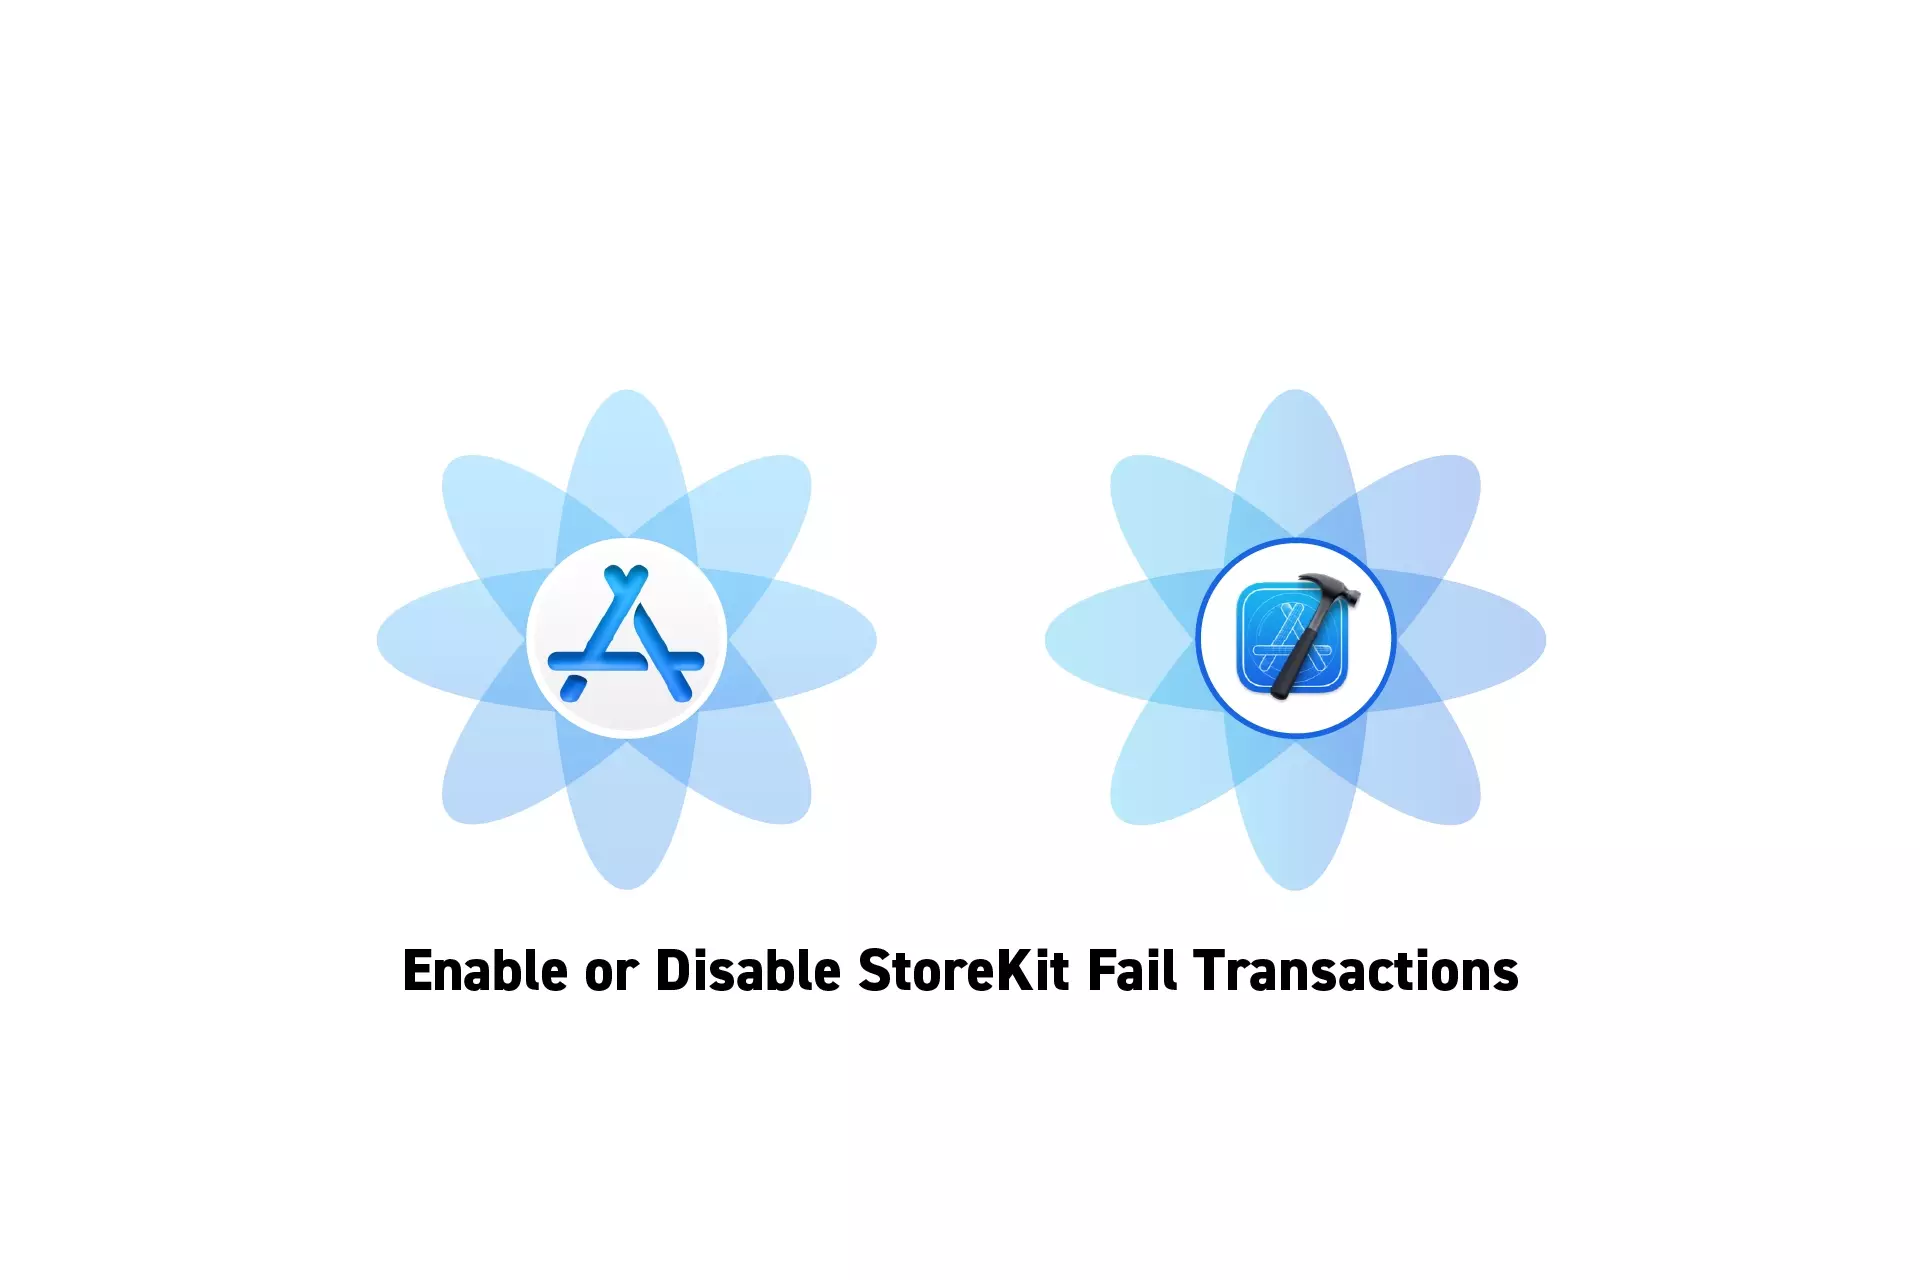 Two flowers that represent StoreKit and Xcode side by side. Beneath them sits the text "Enable or Disable StoreKit Fail Transactions."